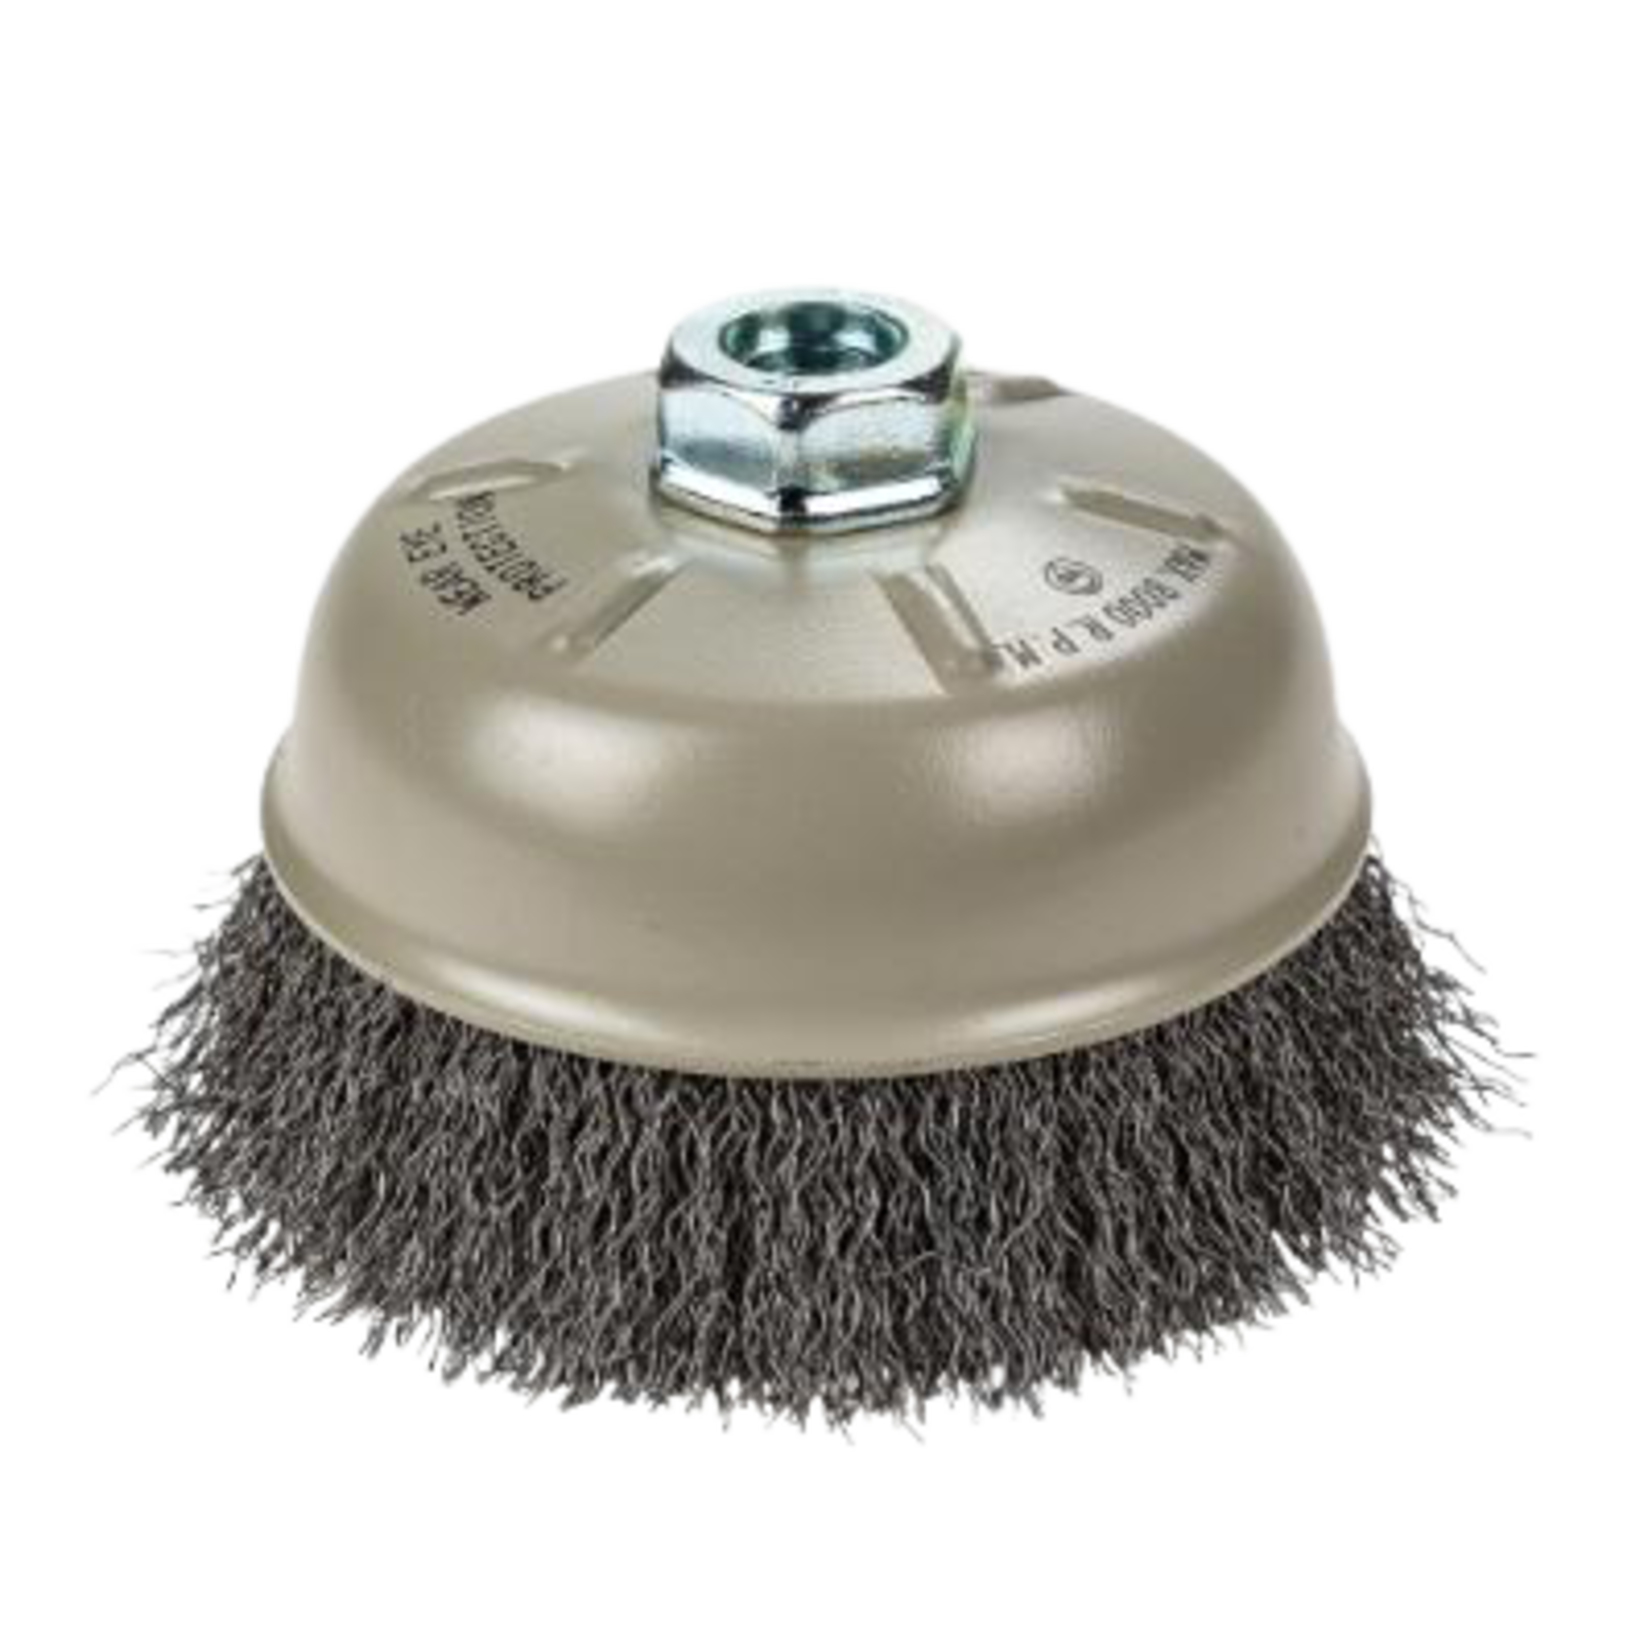 CW CUP BRUSH 5IN WITH 5/8IN-11NC